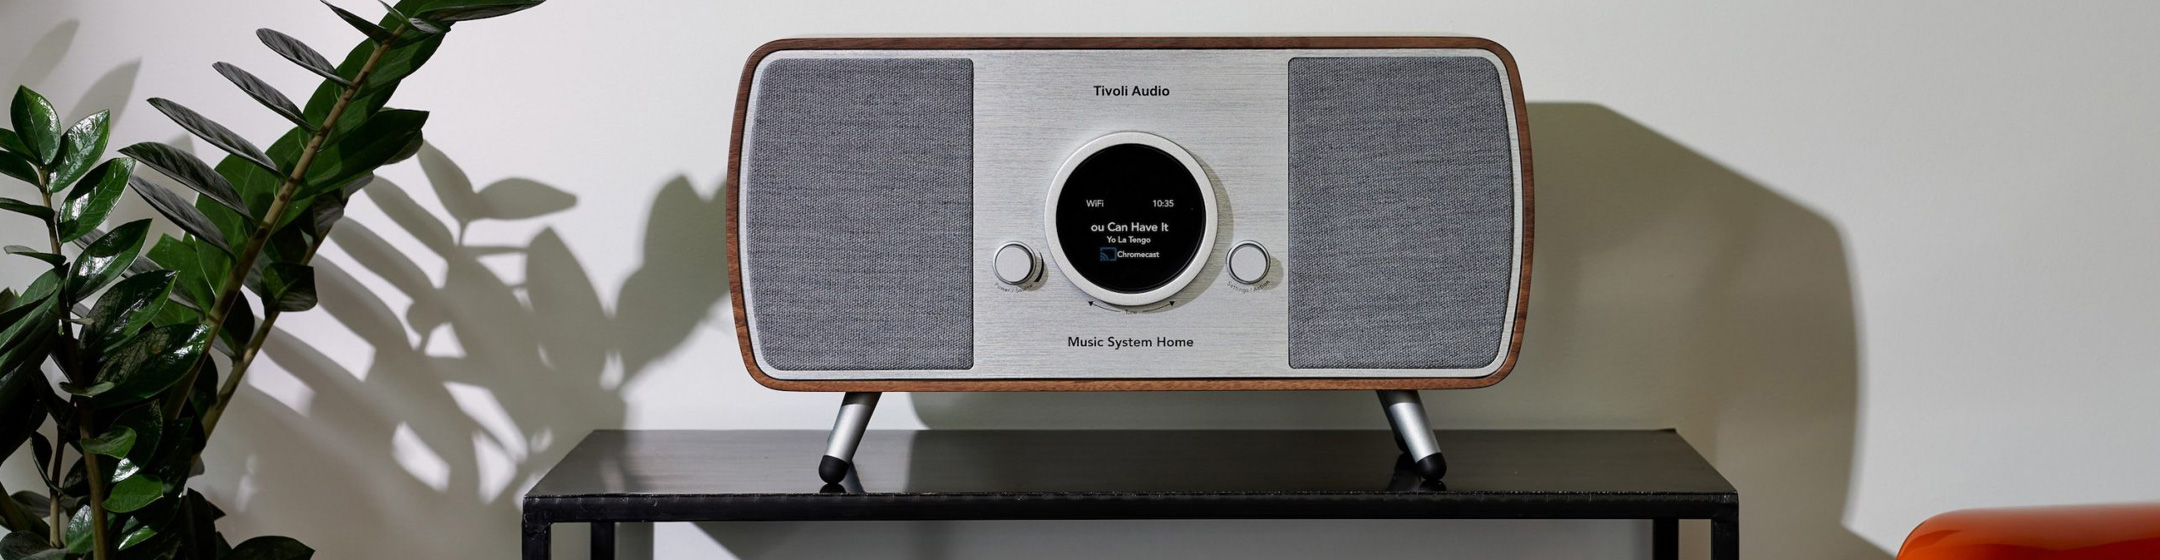 Pic showing a Tivoli Audio Home Gen 2 product on a sideboard